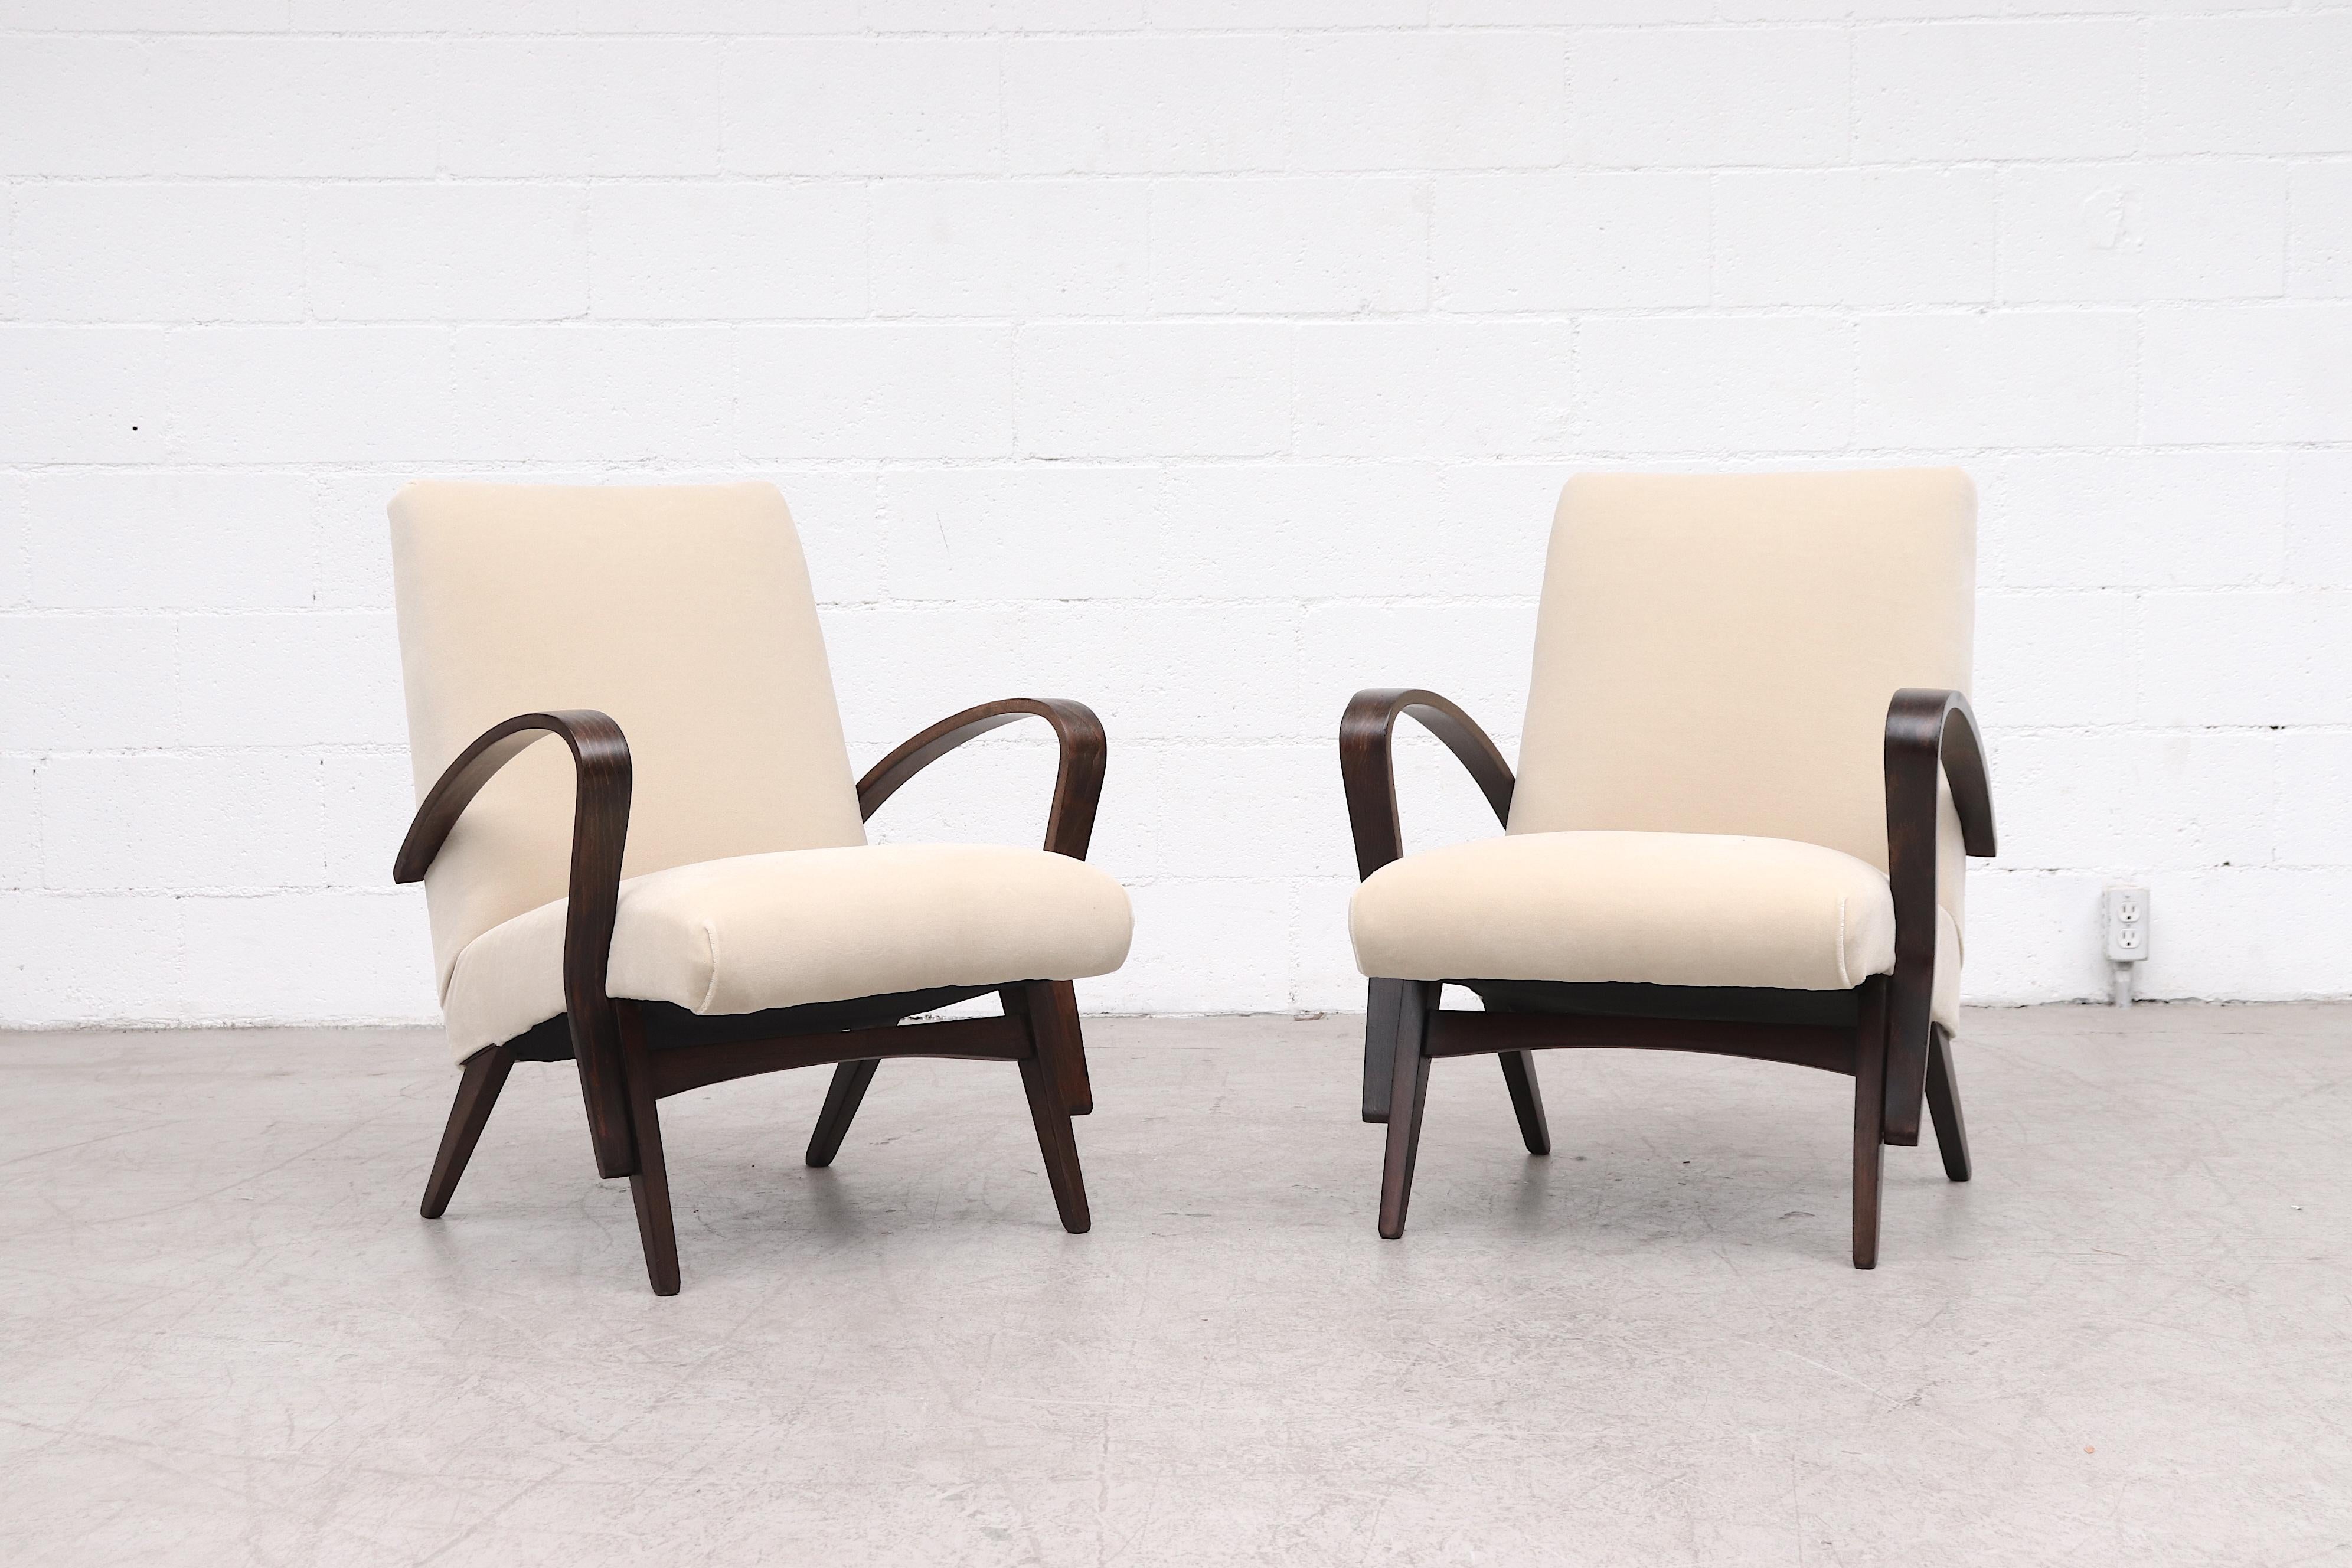 Pair of Halabala style cream upholstered lounge chairs with lightly refinished dark bent wood arms and matching tapered legs. In original condition with some visible wear consistent with age and use.